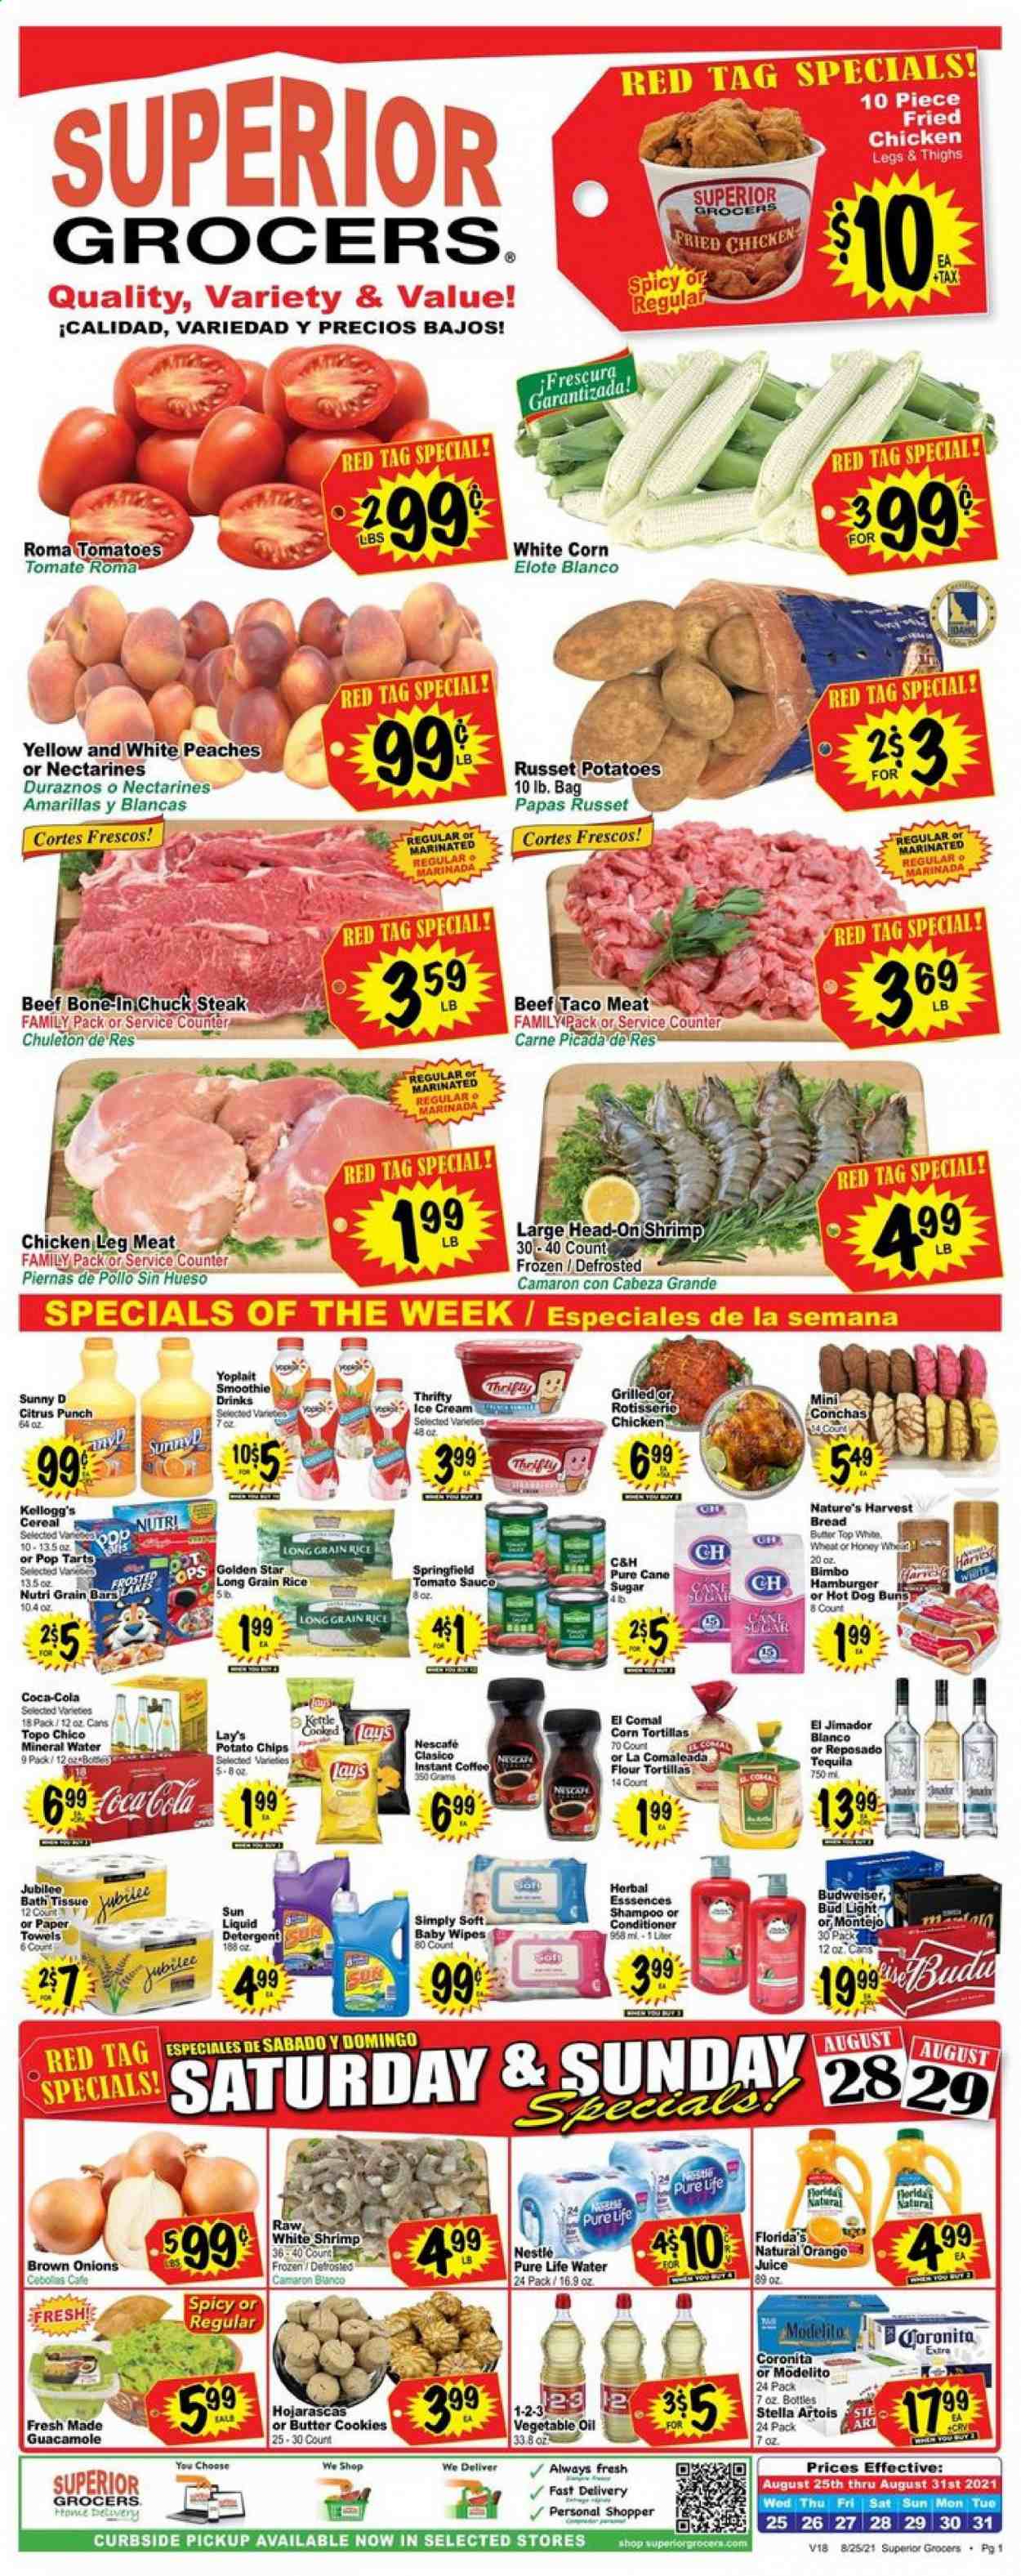 thumbnail - Superior Grocers Flyer - 08/25/2021 - 08/31/2021 - Sales products - bread, corn tortillas, tortillas, buns, flour tortillas, russet potatoes, onion, beef meat, steak, chuck steak, shrimps, chicken roast, sauce, fried chicken, guacamole, Yoplait, ice cream, cookies, Nestlé, butter cookies, Kellogg's, Pop-Tarts, Florida's Natural, potato chips, Lay’s, cane sugar, sugar, tomato sauce, cereals, rice, long grain rice, vegetable oil, oil, Coca-Cola, orange juice, juice, fruit punch, smoothie, mineral water, Pure Life Water, instant coffee, Nescafé, tequila, beer, Bud Light, liquid detergent, conditioner, Budweiser, nectarines, Stella Artois, peaches. Page 1.